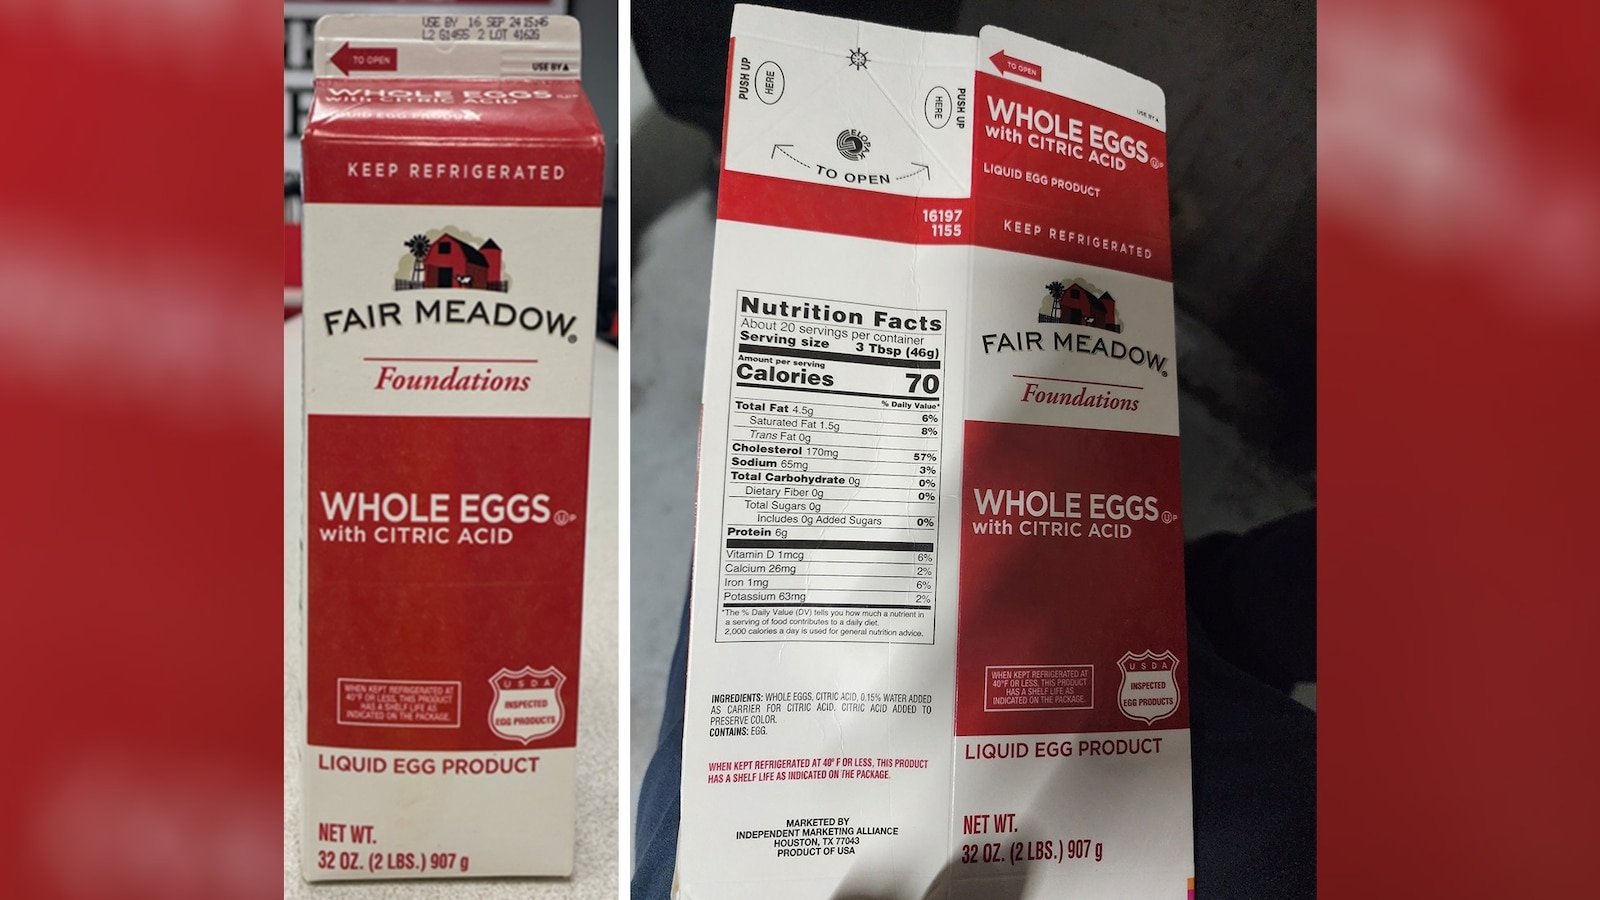 More than 4K pounds of liquid eggs recalled from 9 states